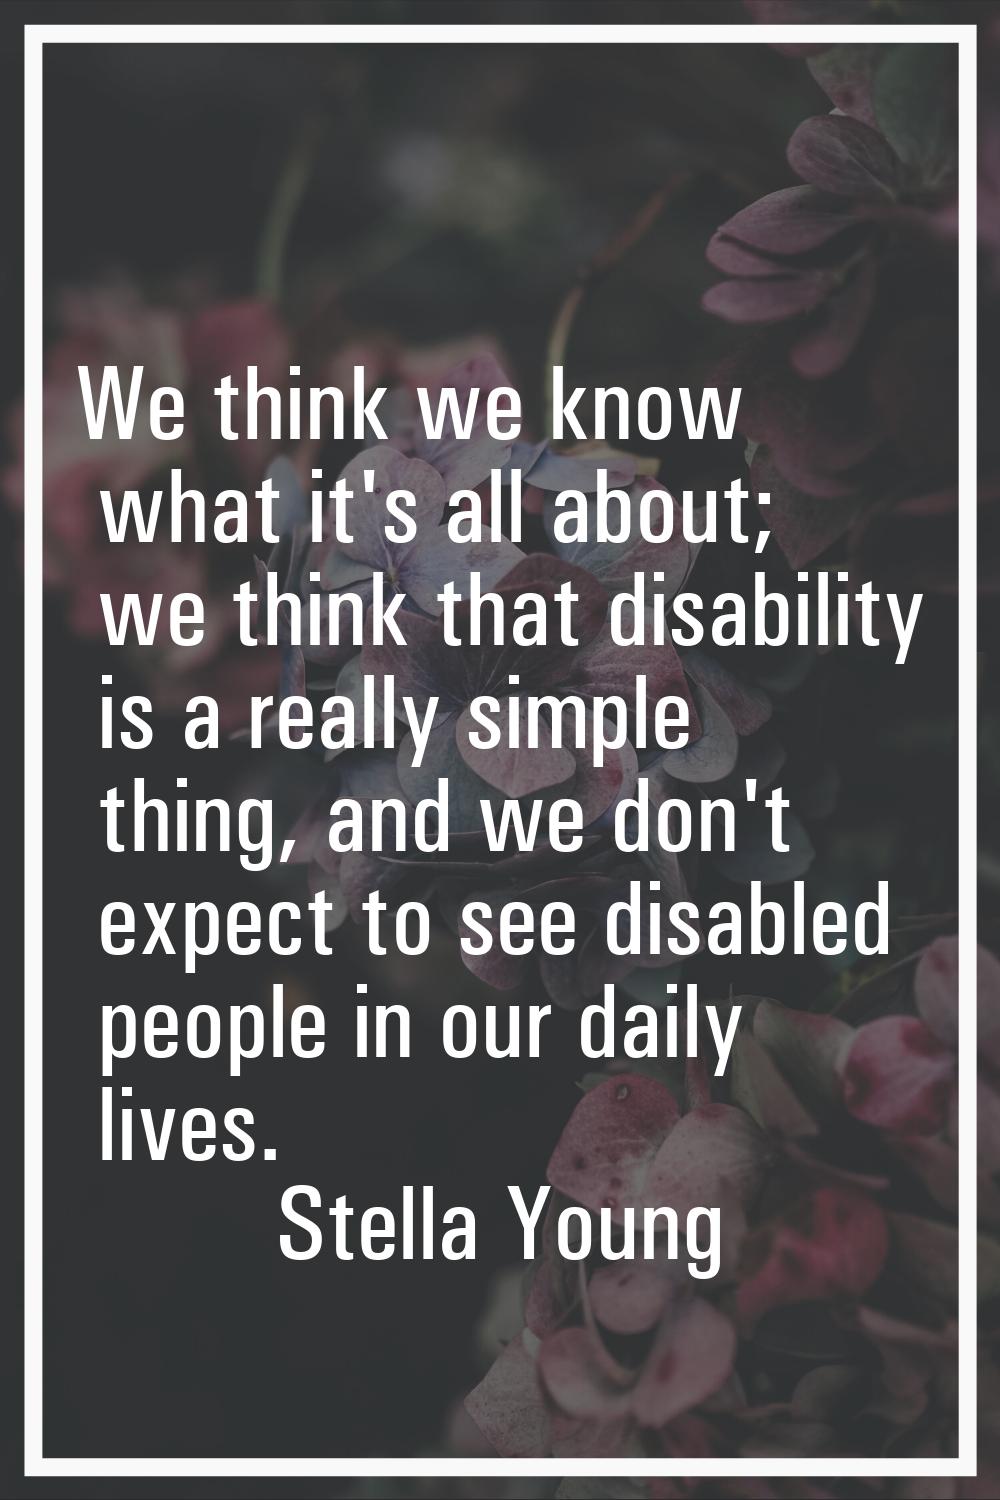 We think we know what it's all about; we think that disability is a really simple thing, and we don